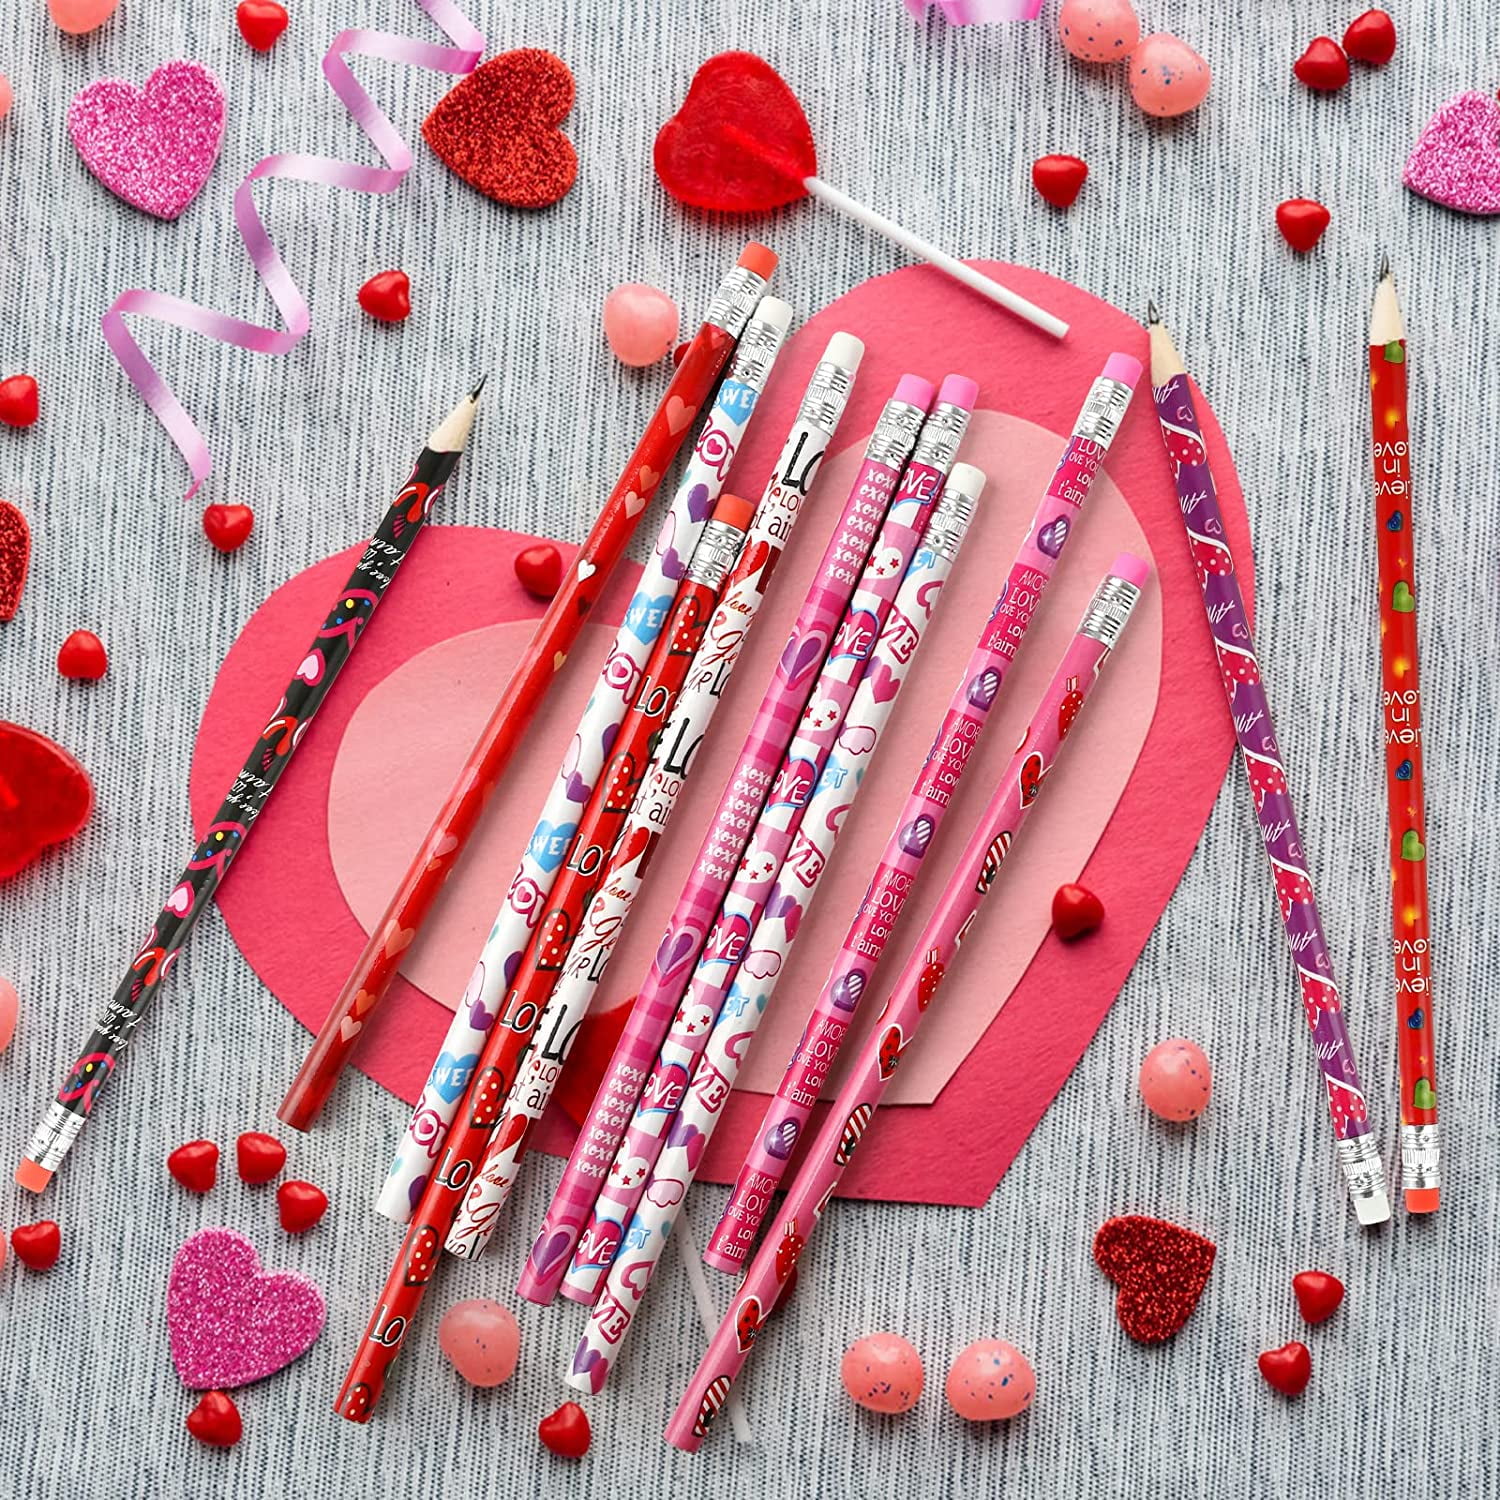 Kesote Valentine Pencils for Kids Heart Pencils with Erasers for Valentines  Day Gifts Party Favors Bags Goodie Bags Filler School Favors for Kids